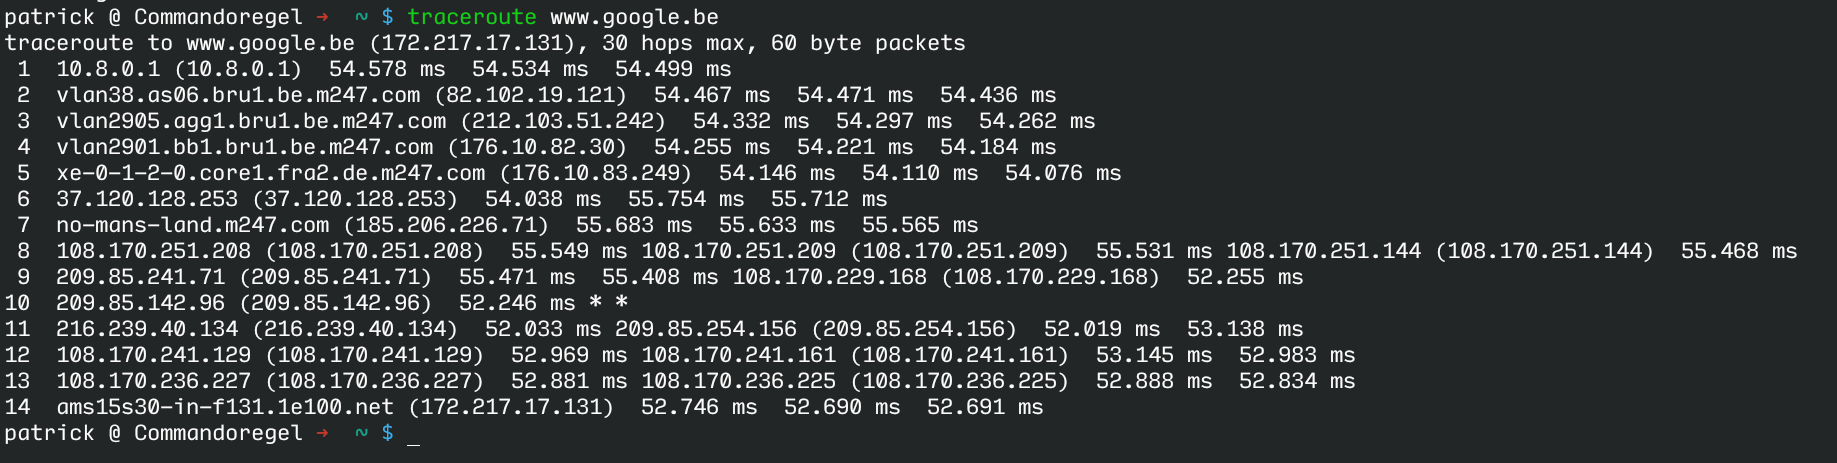 $ traceroute www.google.be